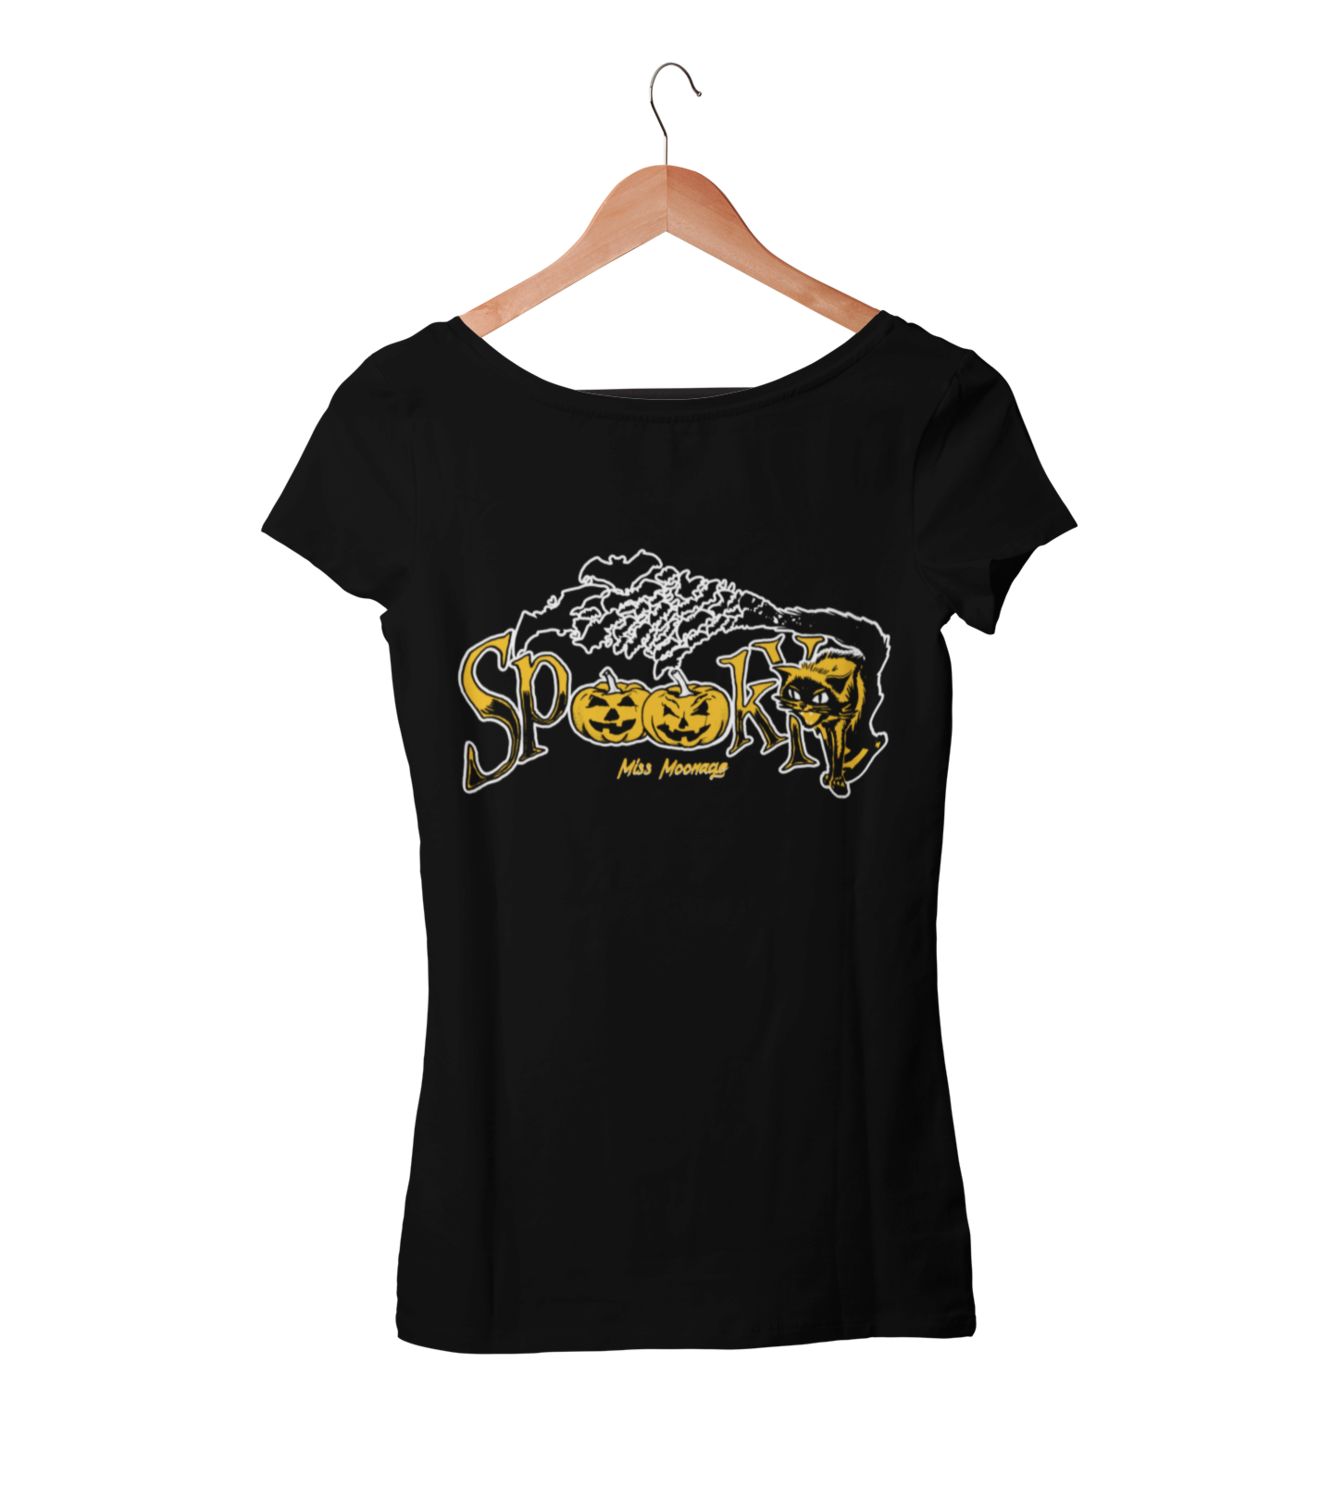 SPOOKY by MISS MOONAGE tshirt for WOMEN